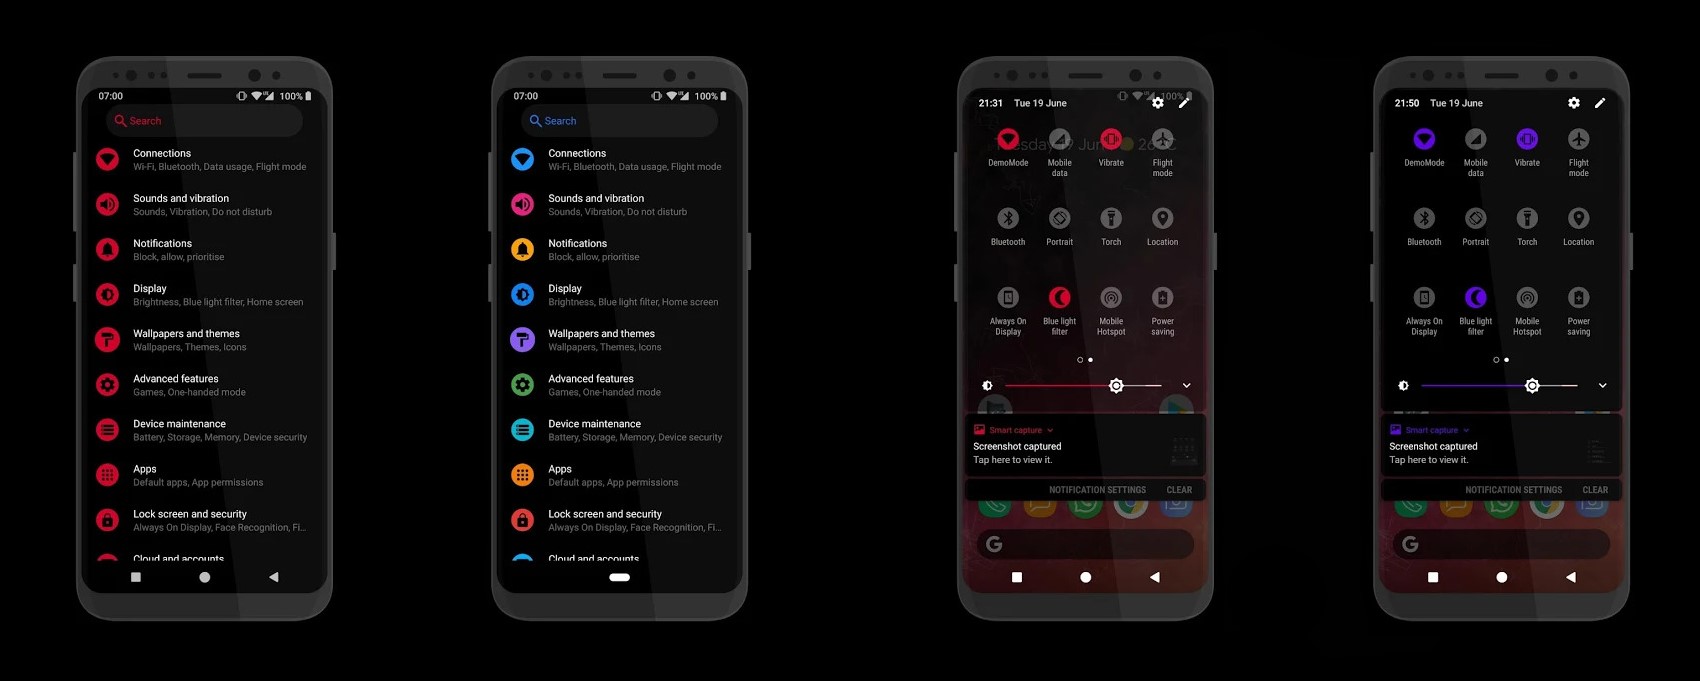 8 Best Substratum Themes for Samsung Victory